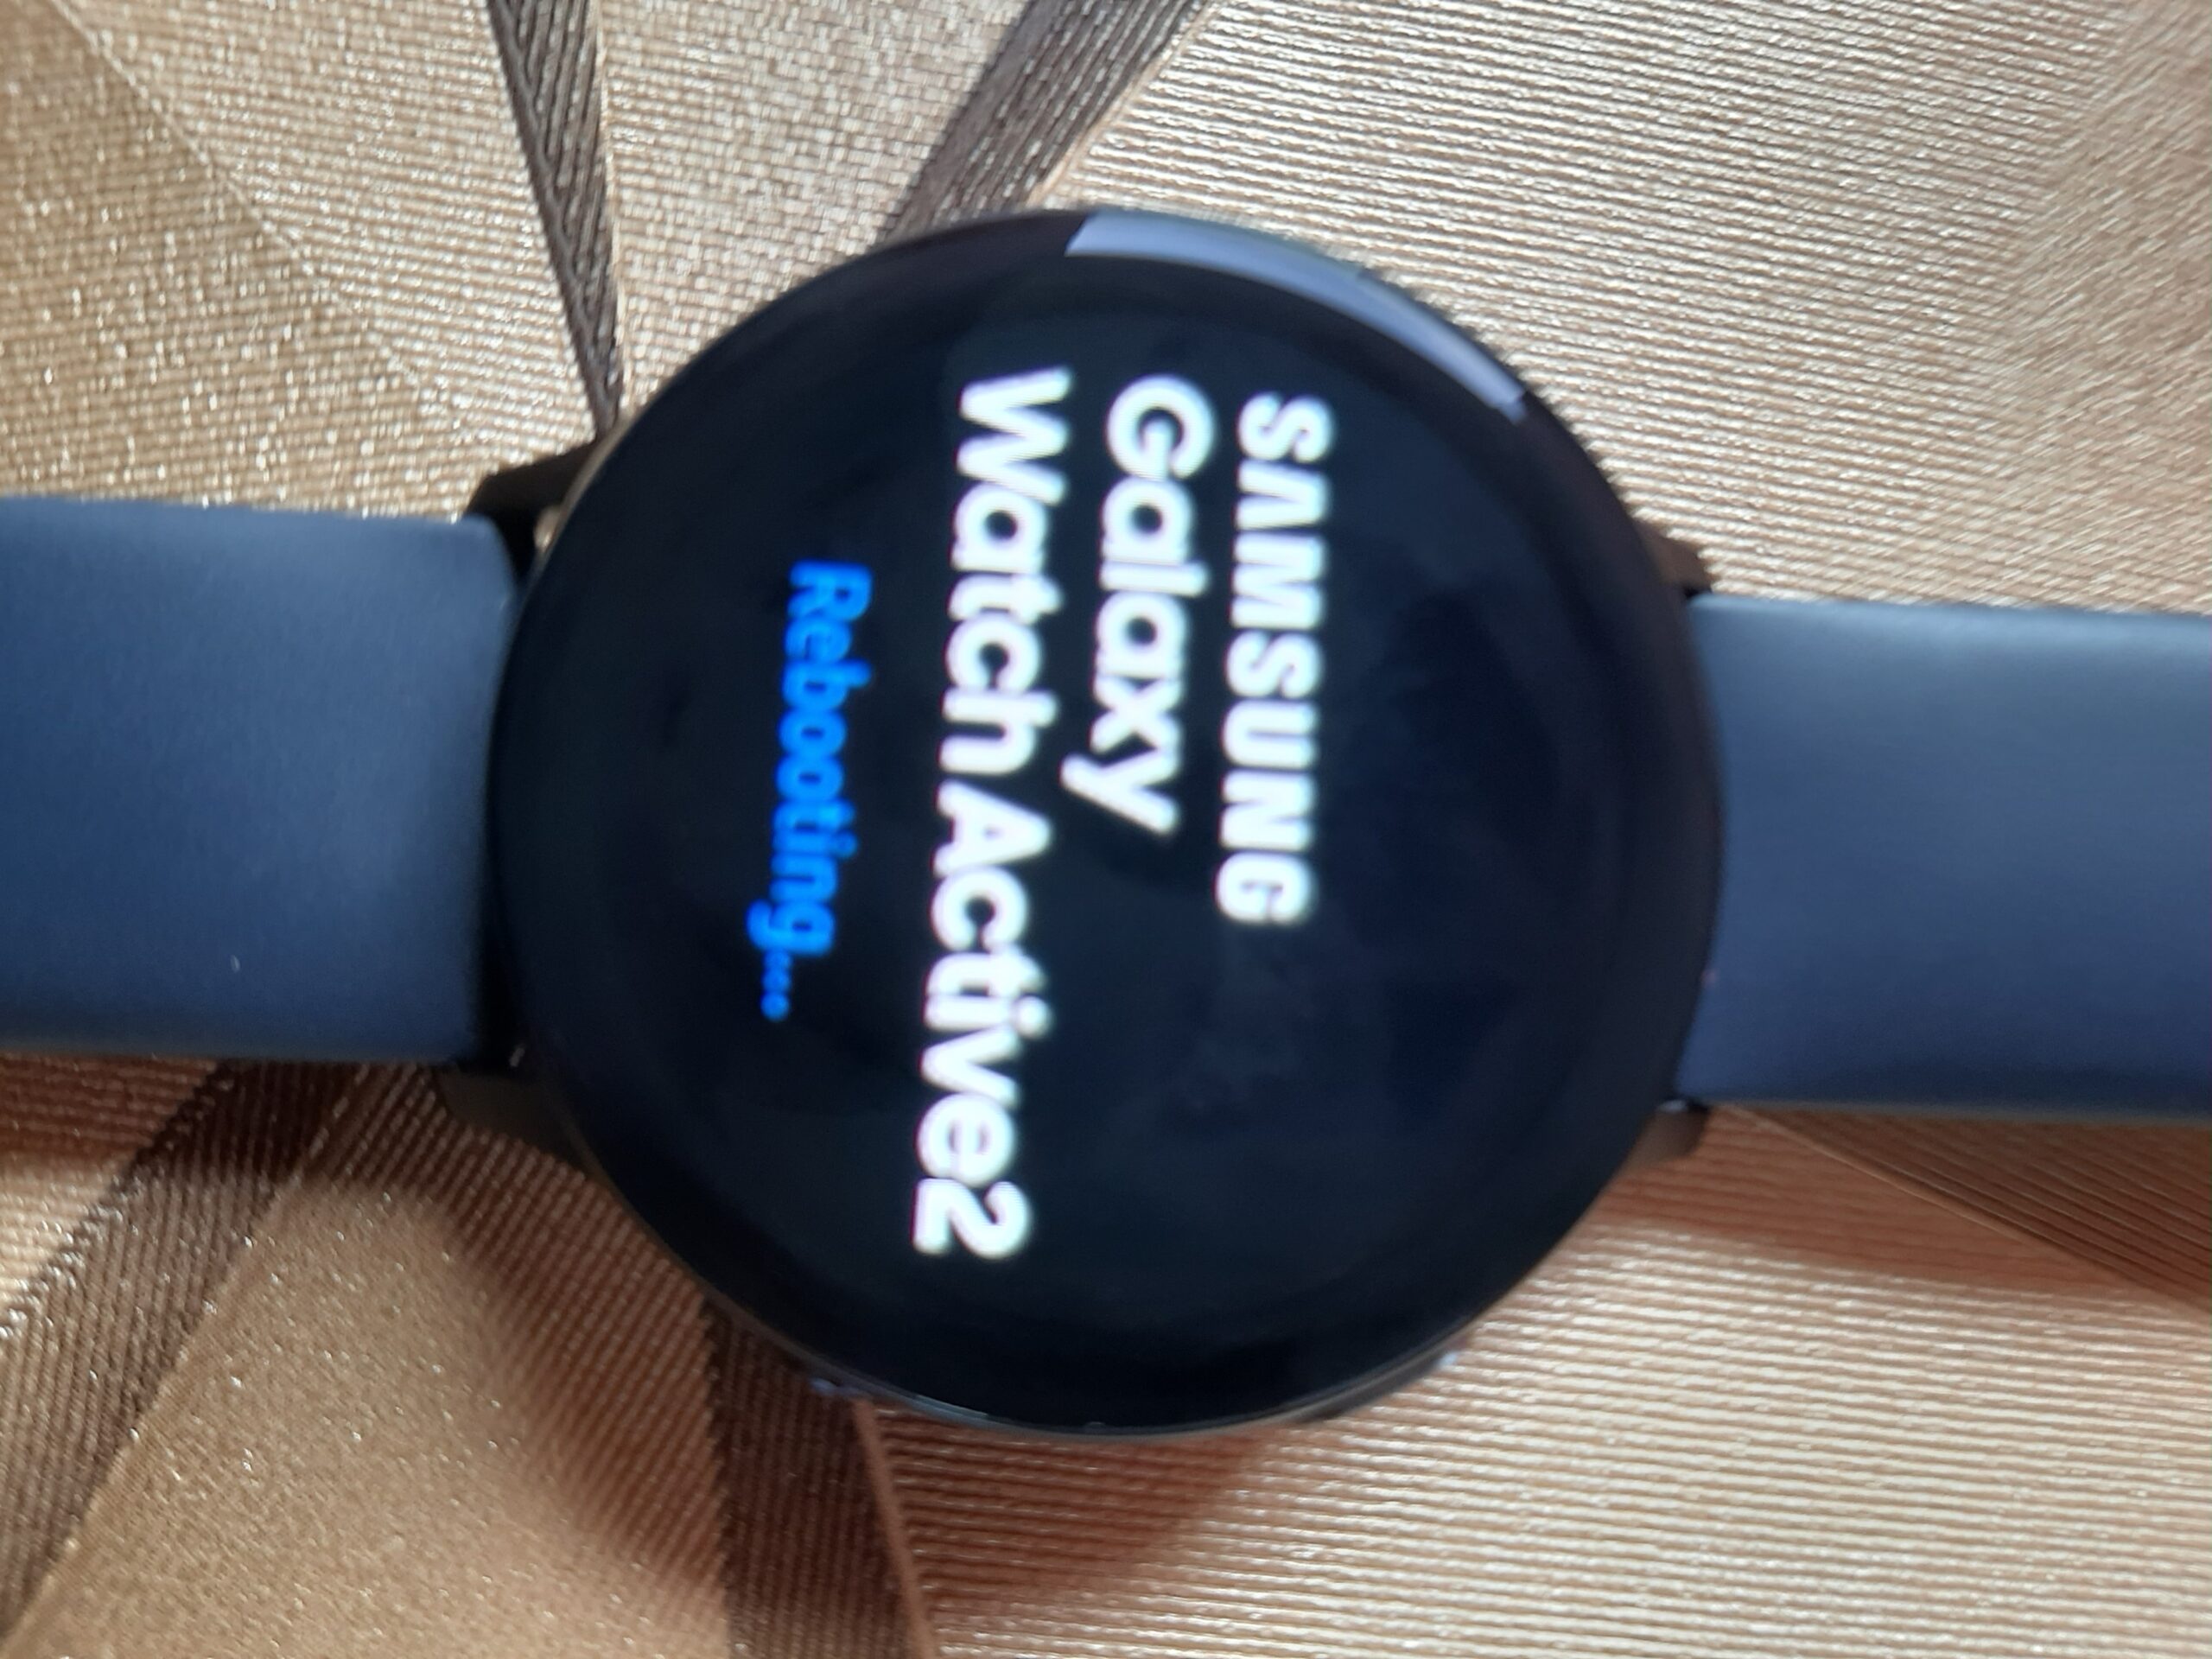 How to Reset Samsung Galaxy Watch Active 2 to Factory Settings